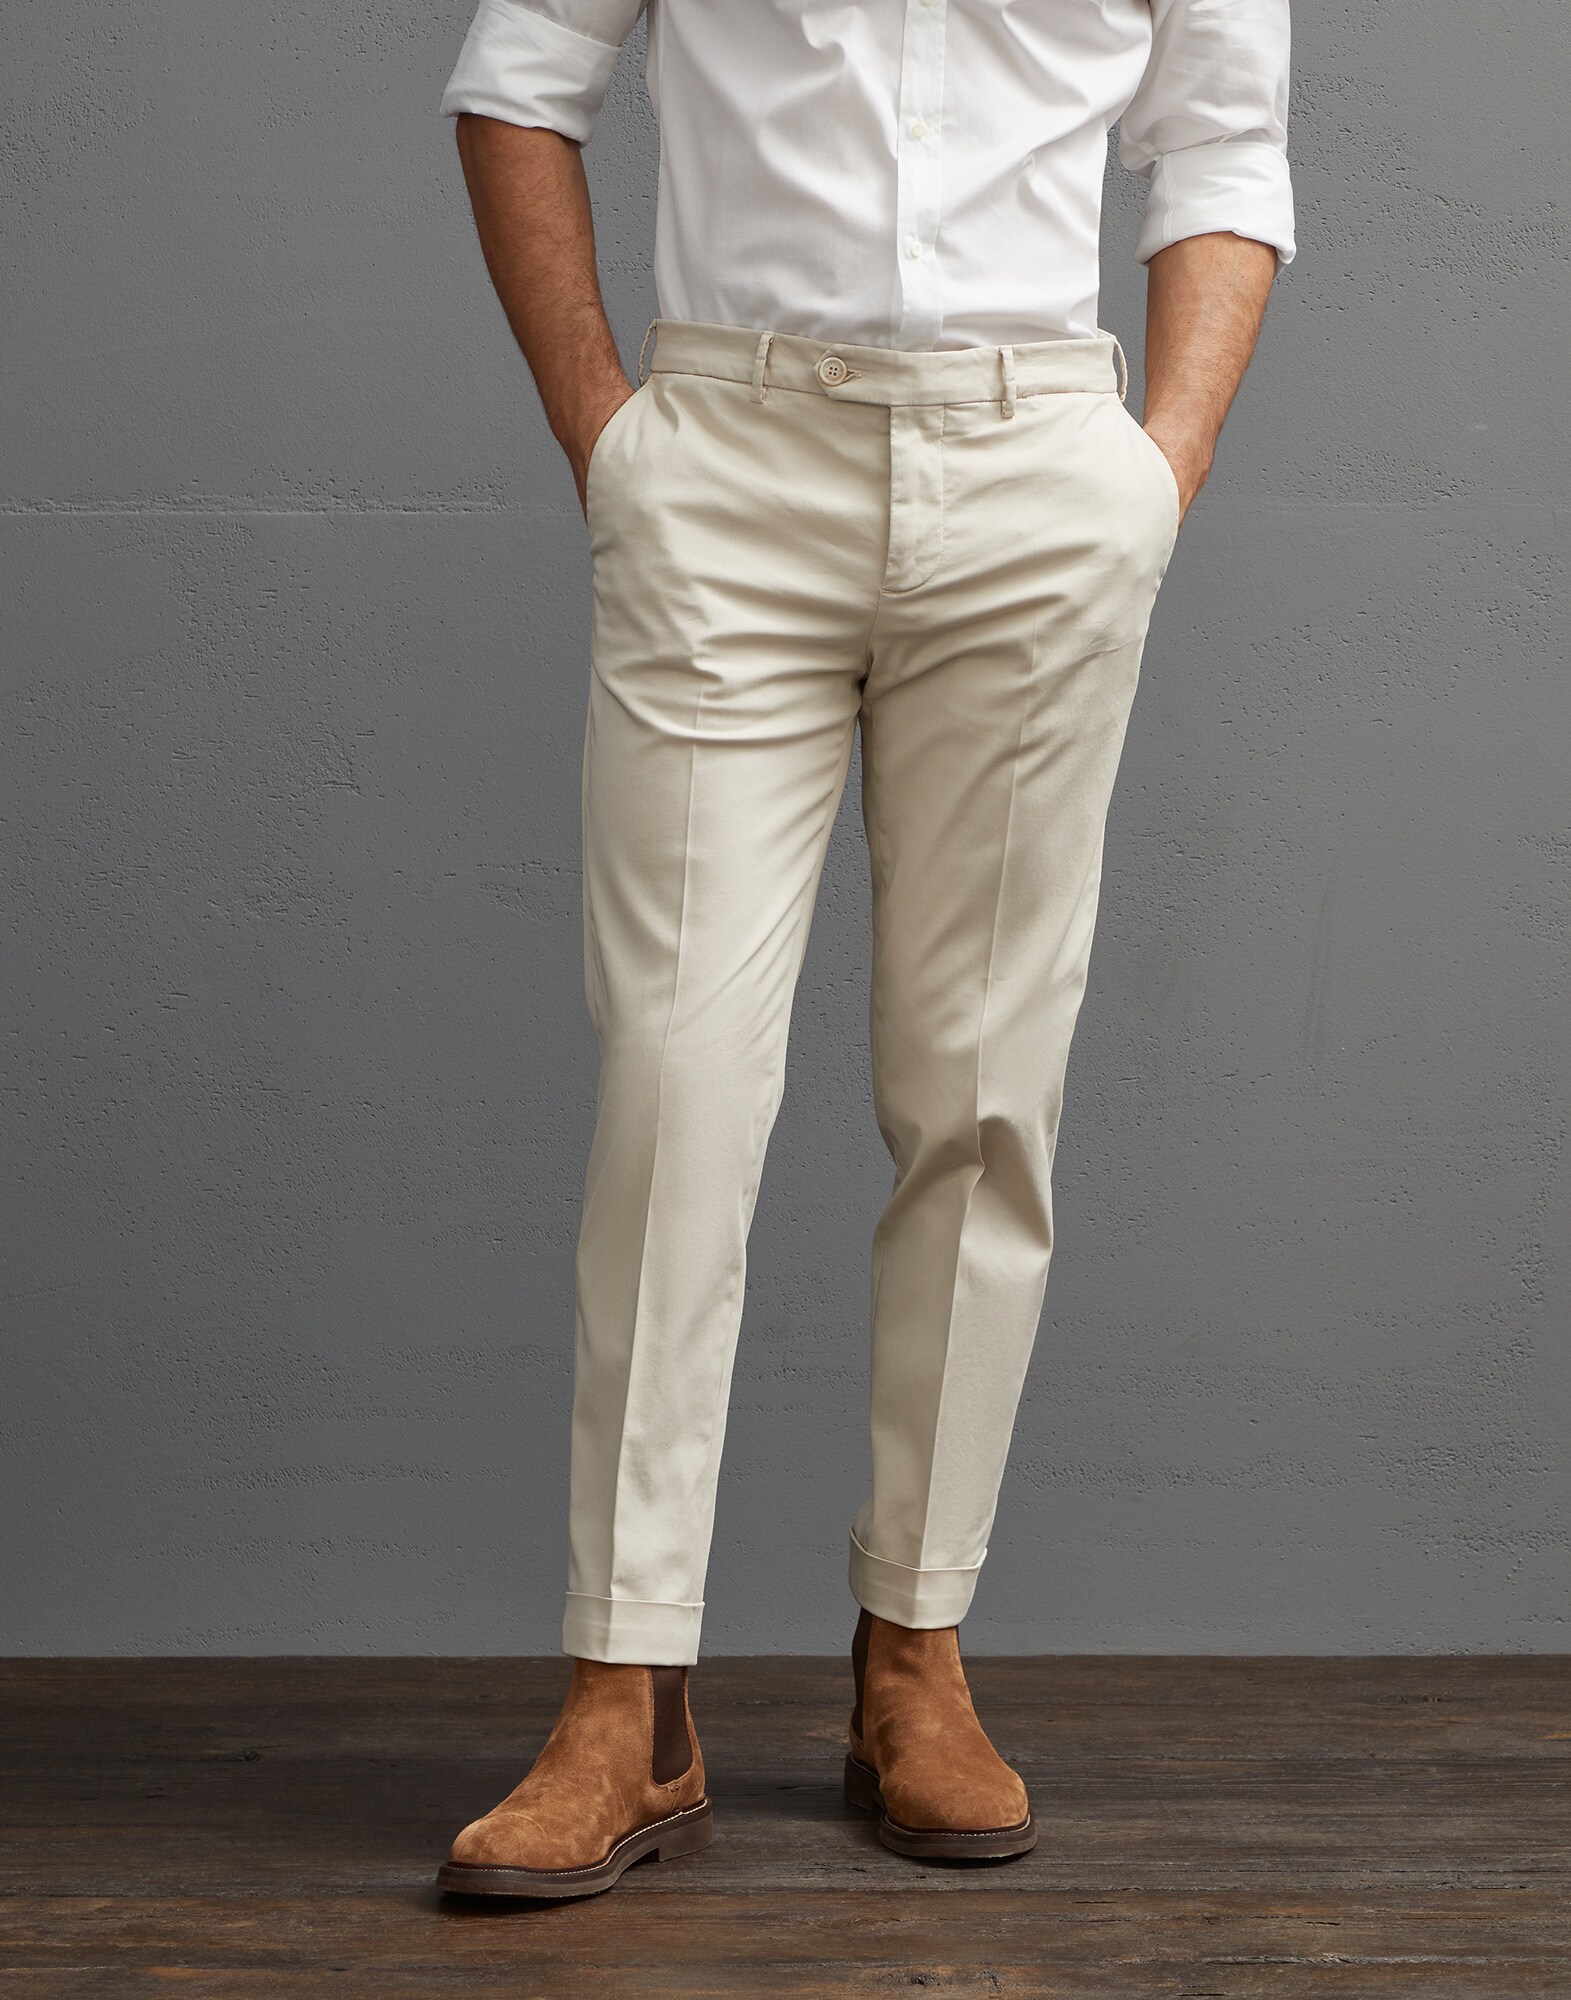 Brunello Cucinelli Mens Pants in Camel Save 49% Mens Trousers Slacks and Chinos Brunello Cucinelli Trousers Slacks and Chinos Natural for Men 